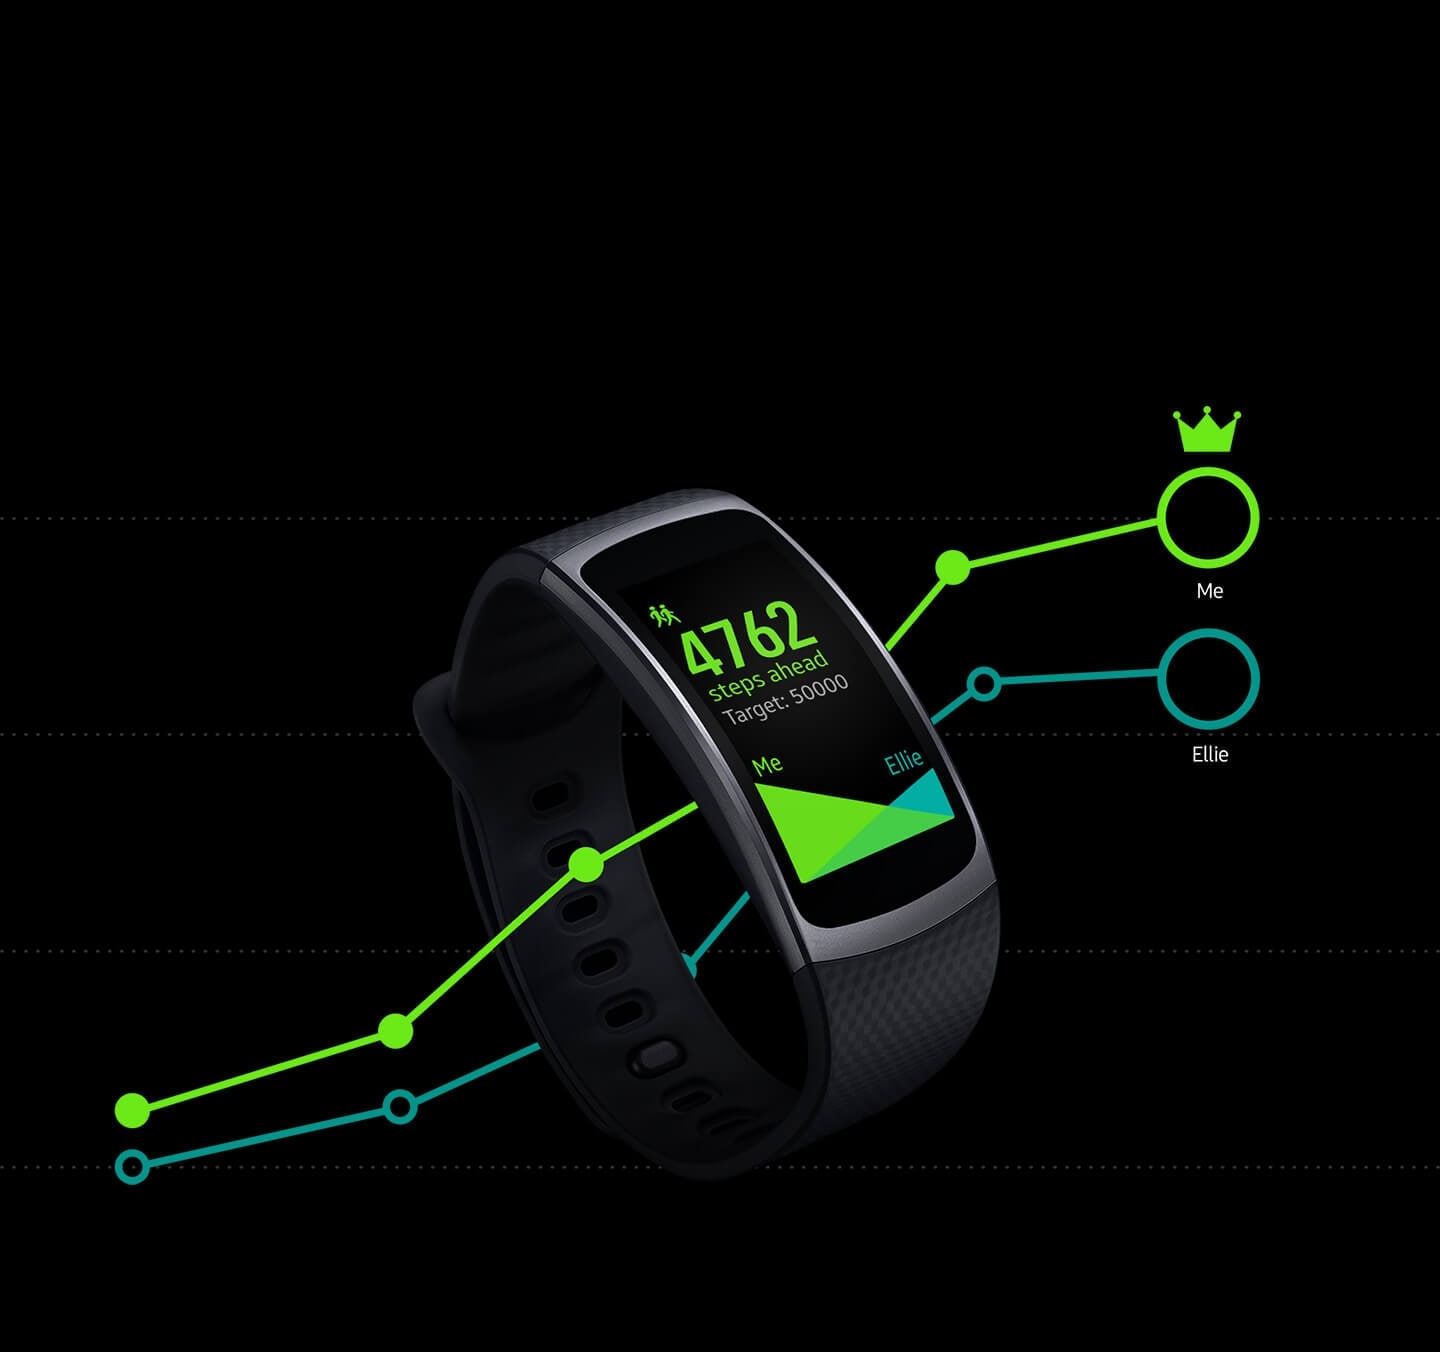 Results of 1:1 competition on Gear Fit2 display showing how many more steps the winner took